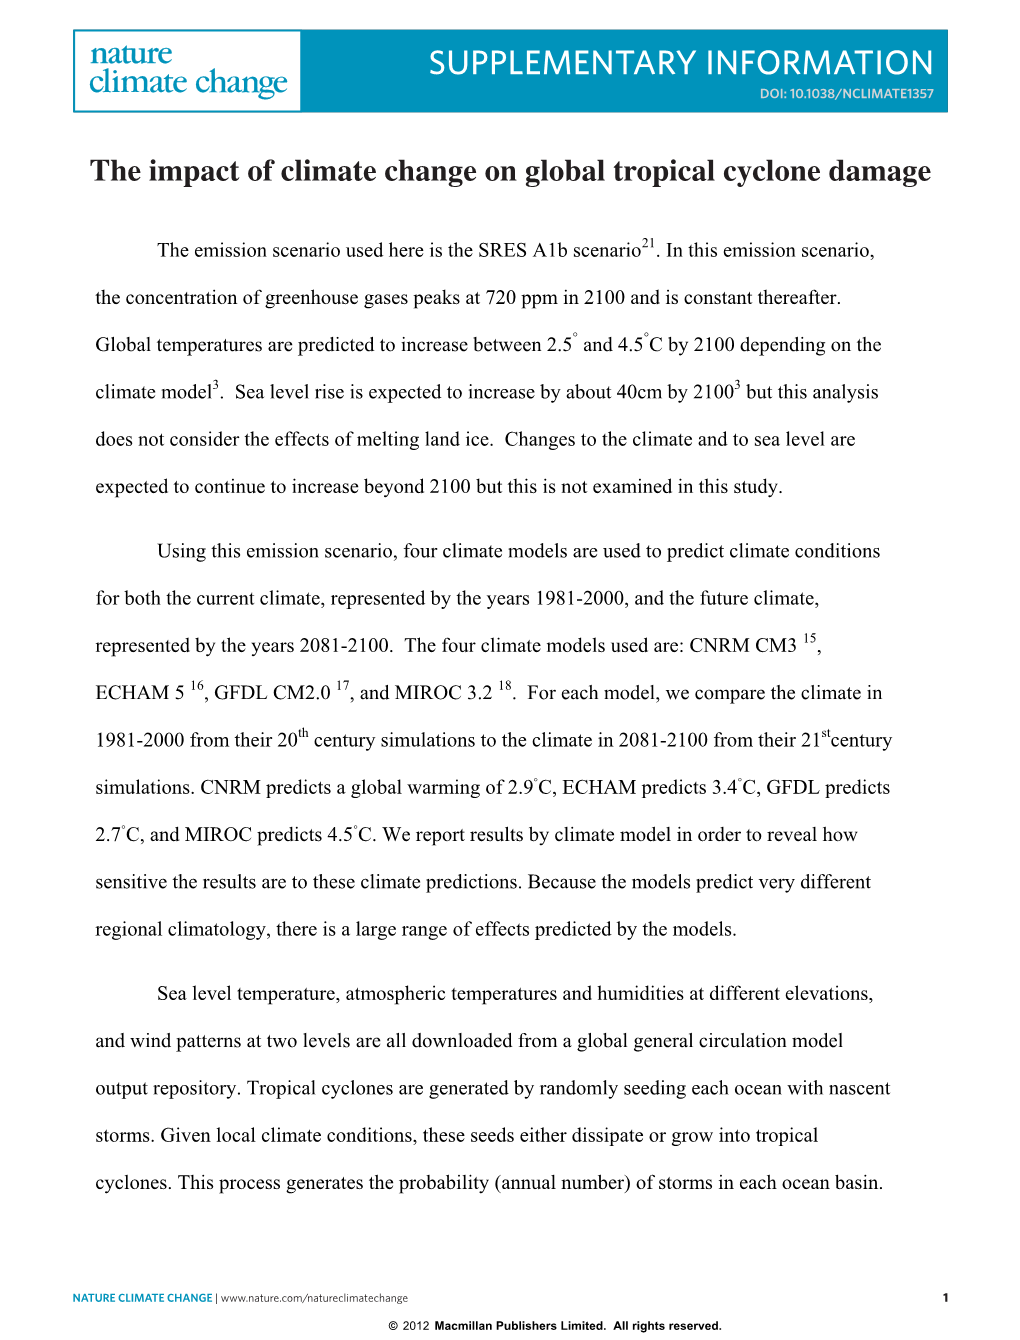 Supplementary Information Doi: 10.1038/Nclimate1357